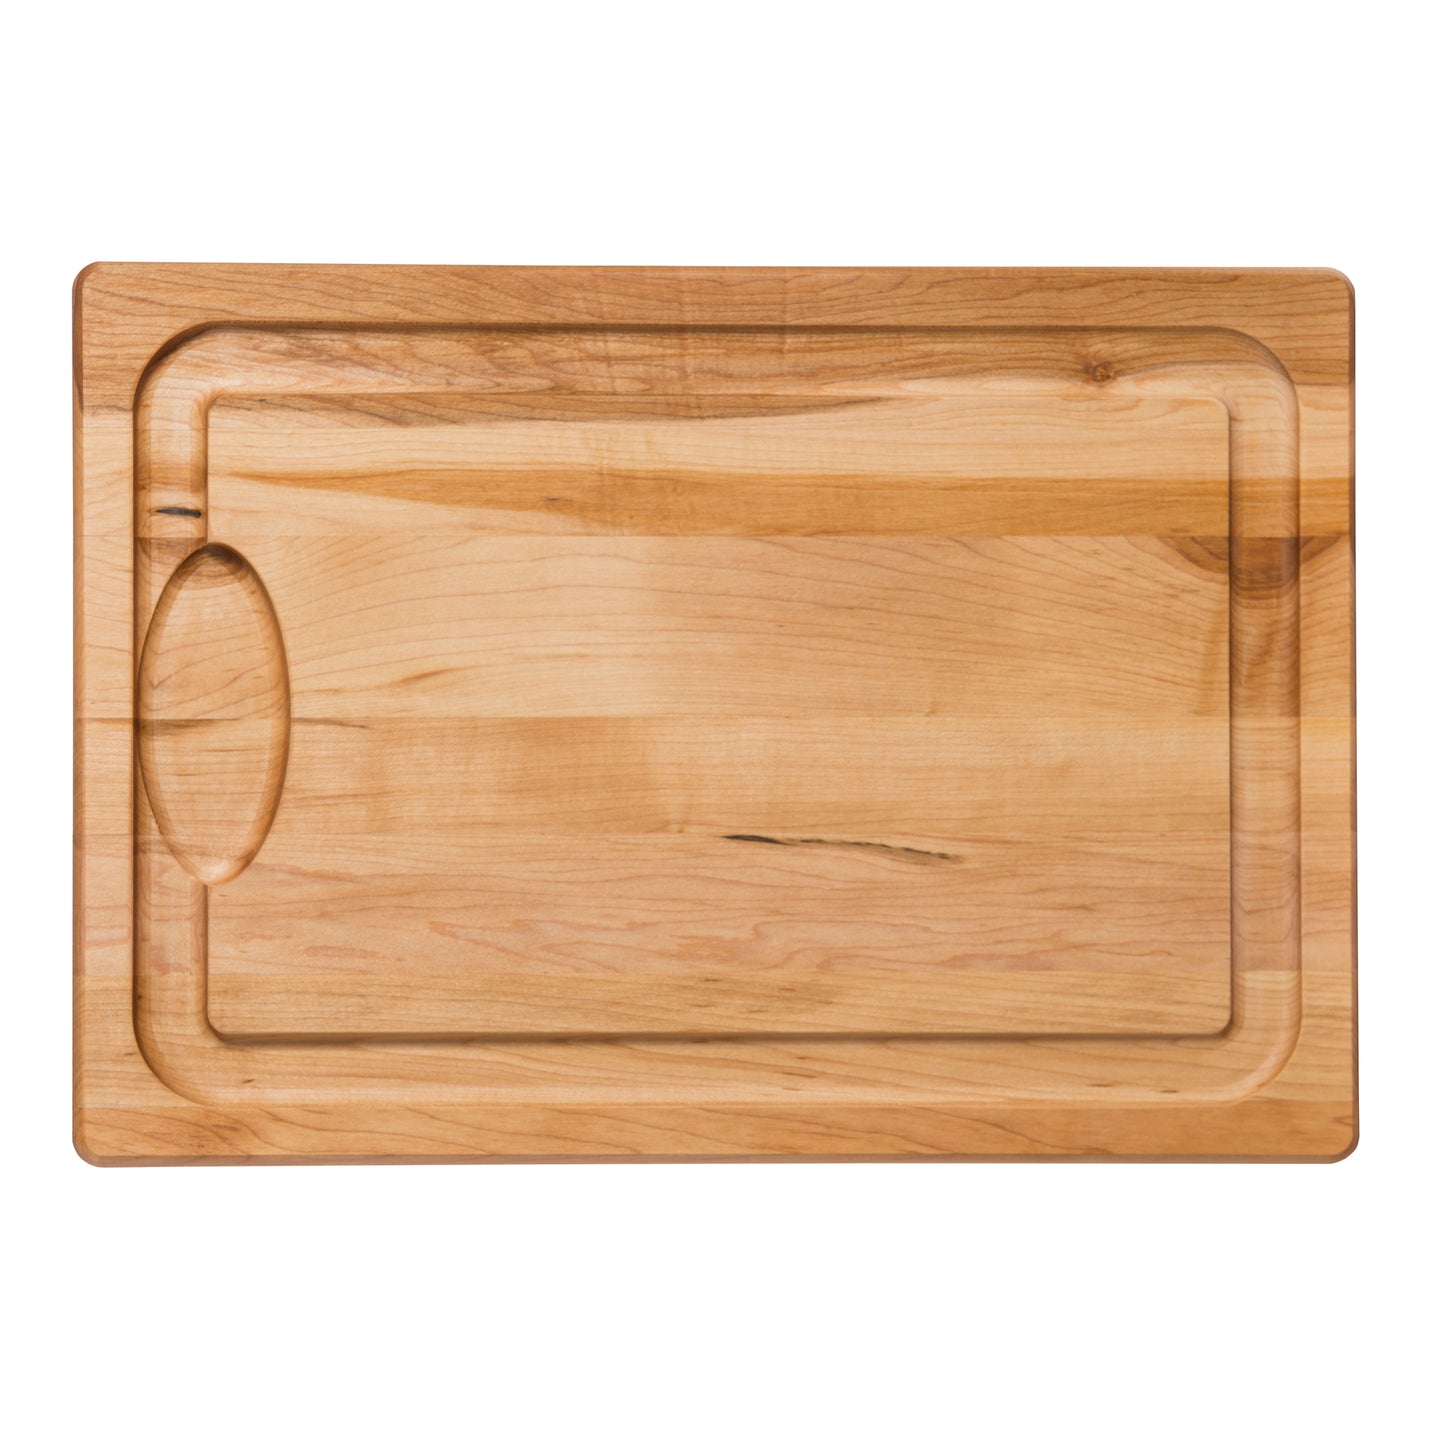 Maple Carving Board-20" x 14"